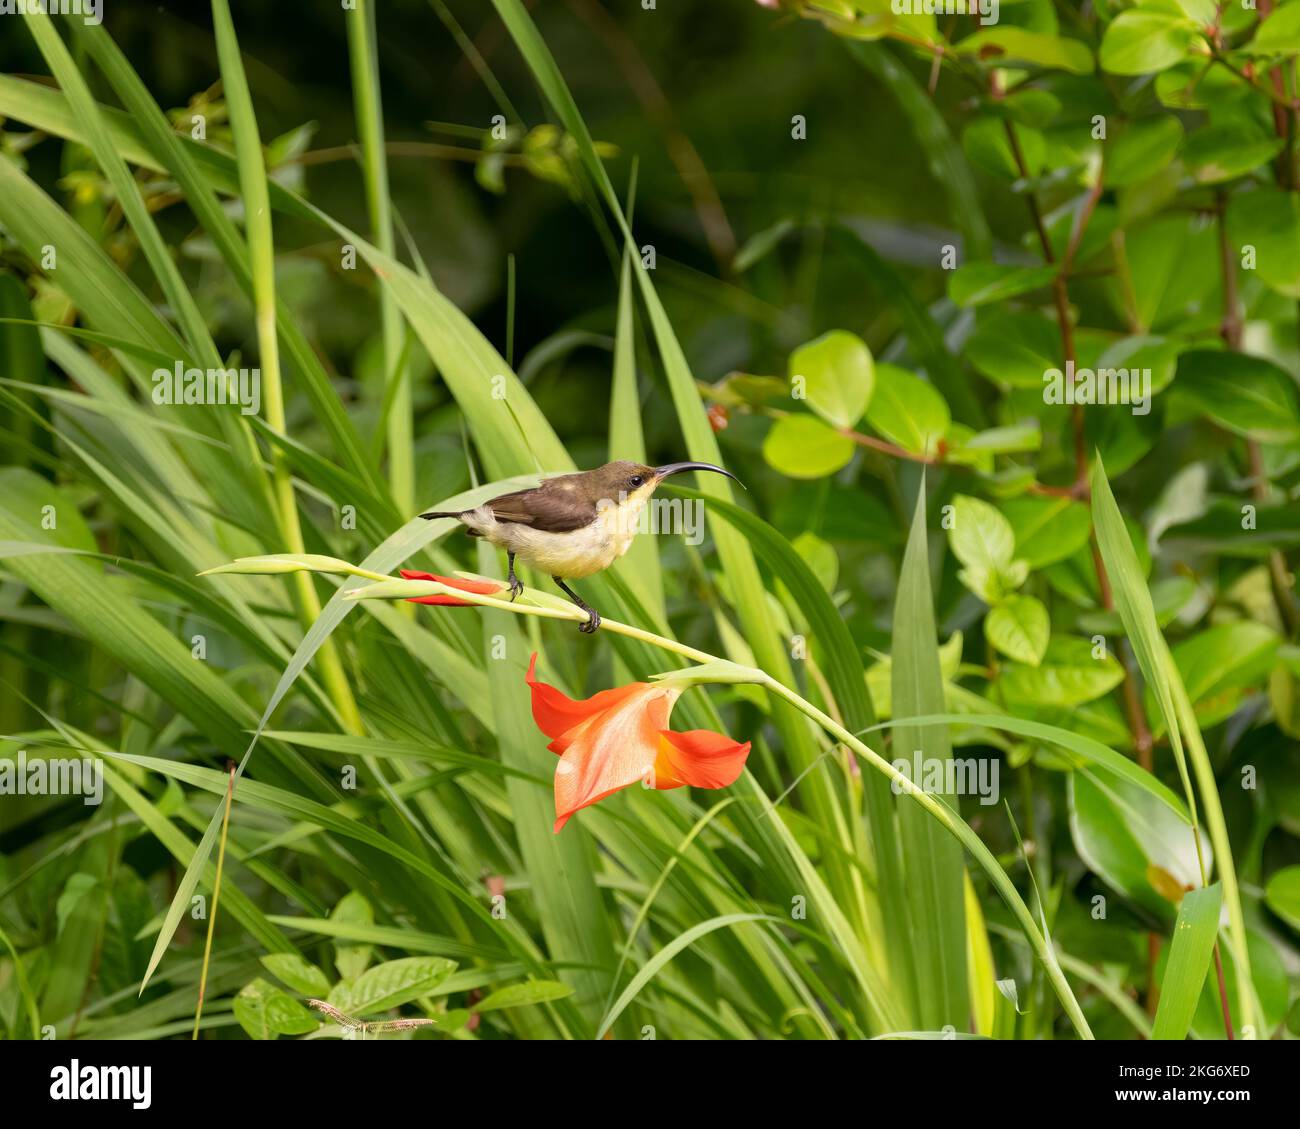 Female Loten's sunbird (Cinnyris lotenius) perched on a Gladiolus flower plant in the garden at Mangalore, Karnataka in India. Also known as the Long- Stock Photo